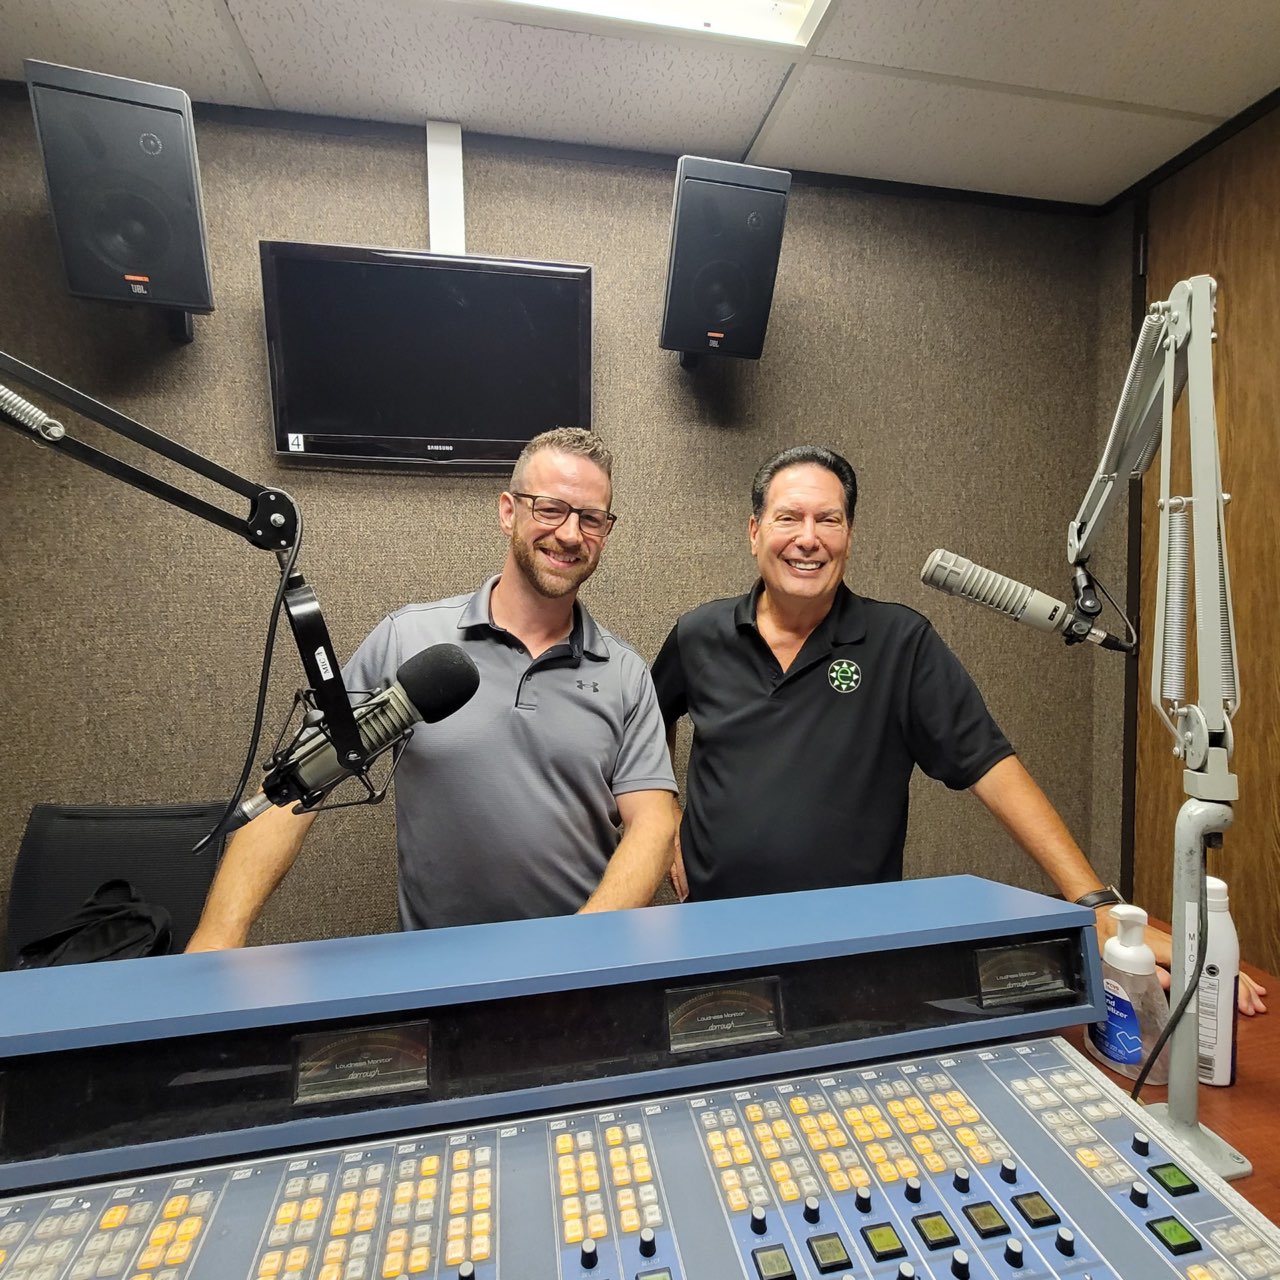 CEO, Steve Burchett appears as a guest on Erenewable / The Green Insider Podcast